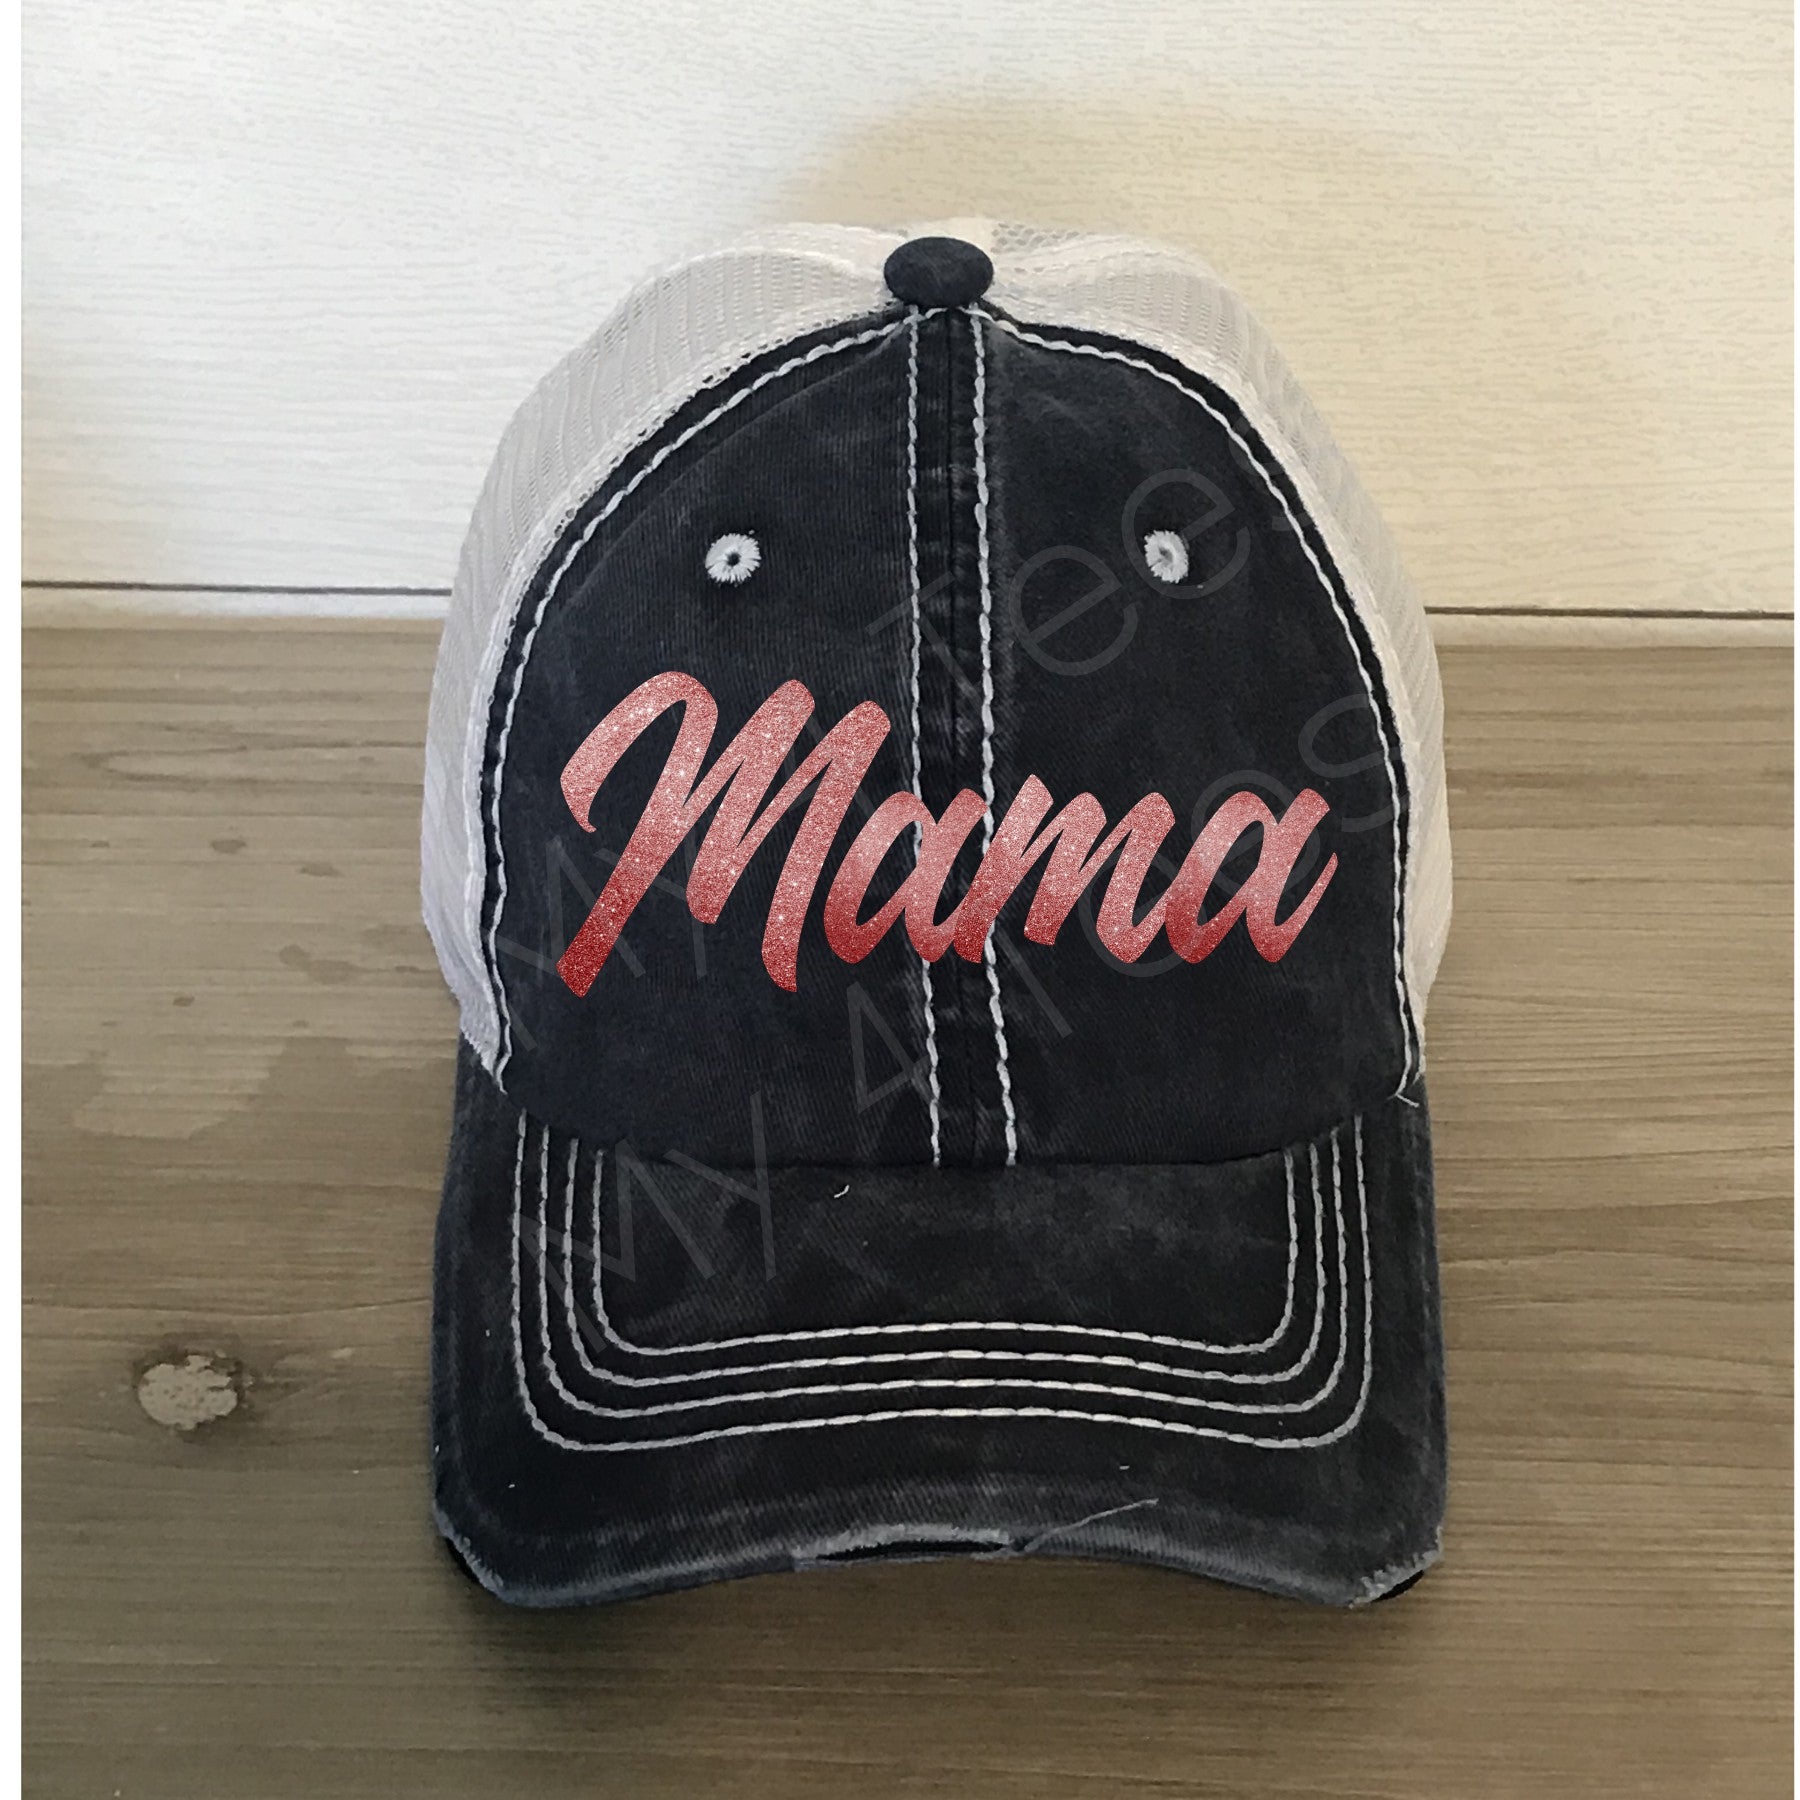 Mama navy & white distressed two-tone hat - Rose Gold word